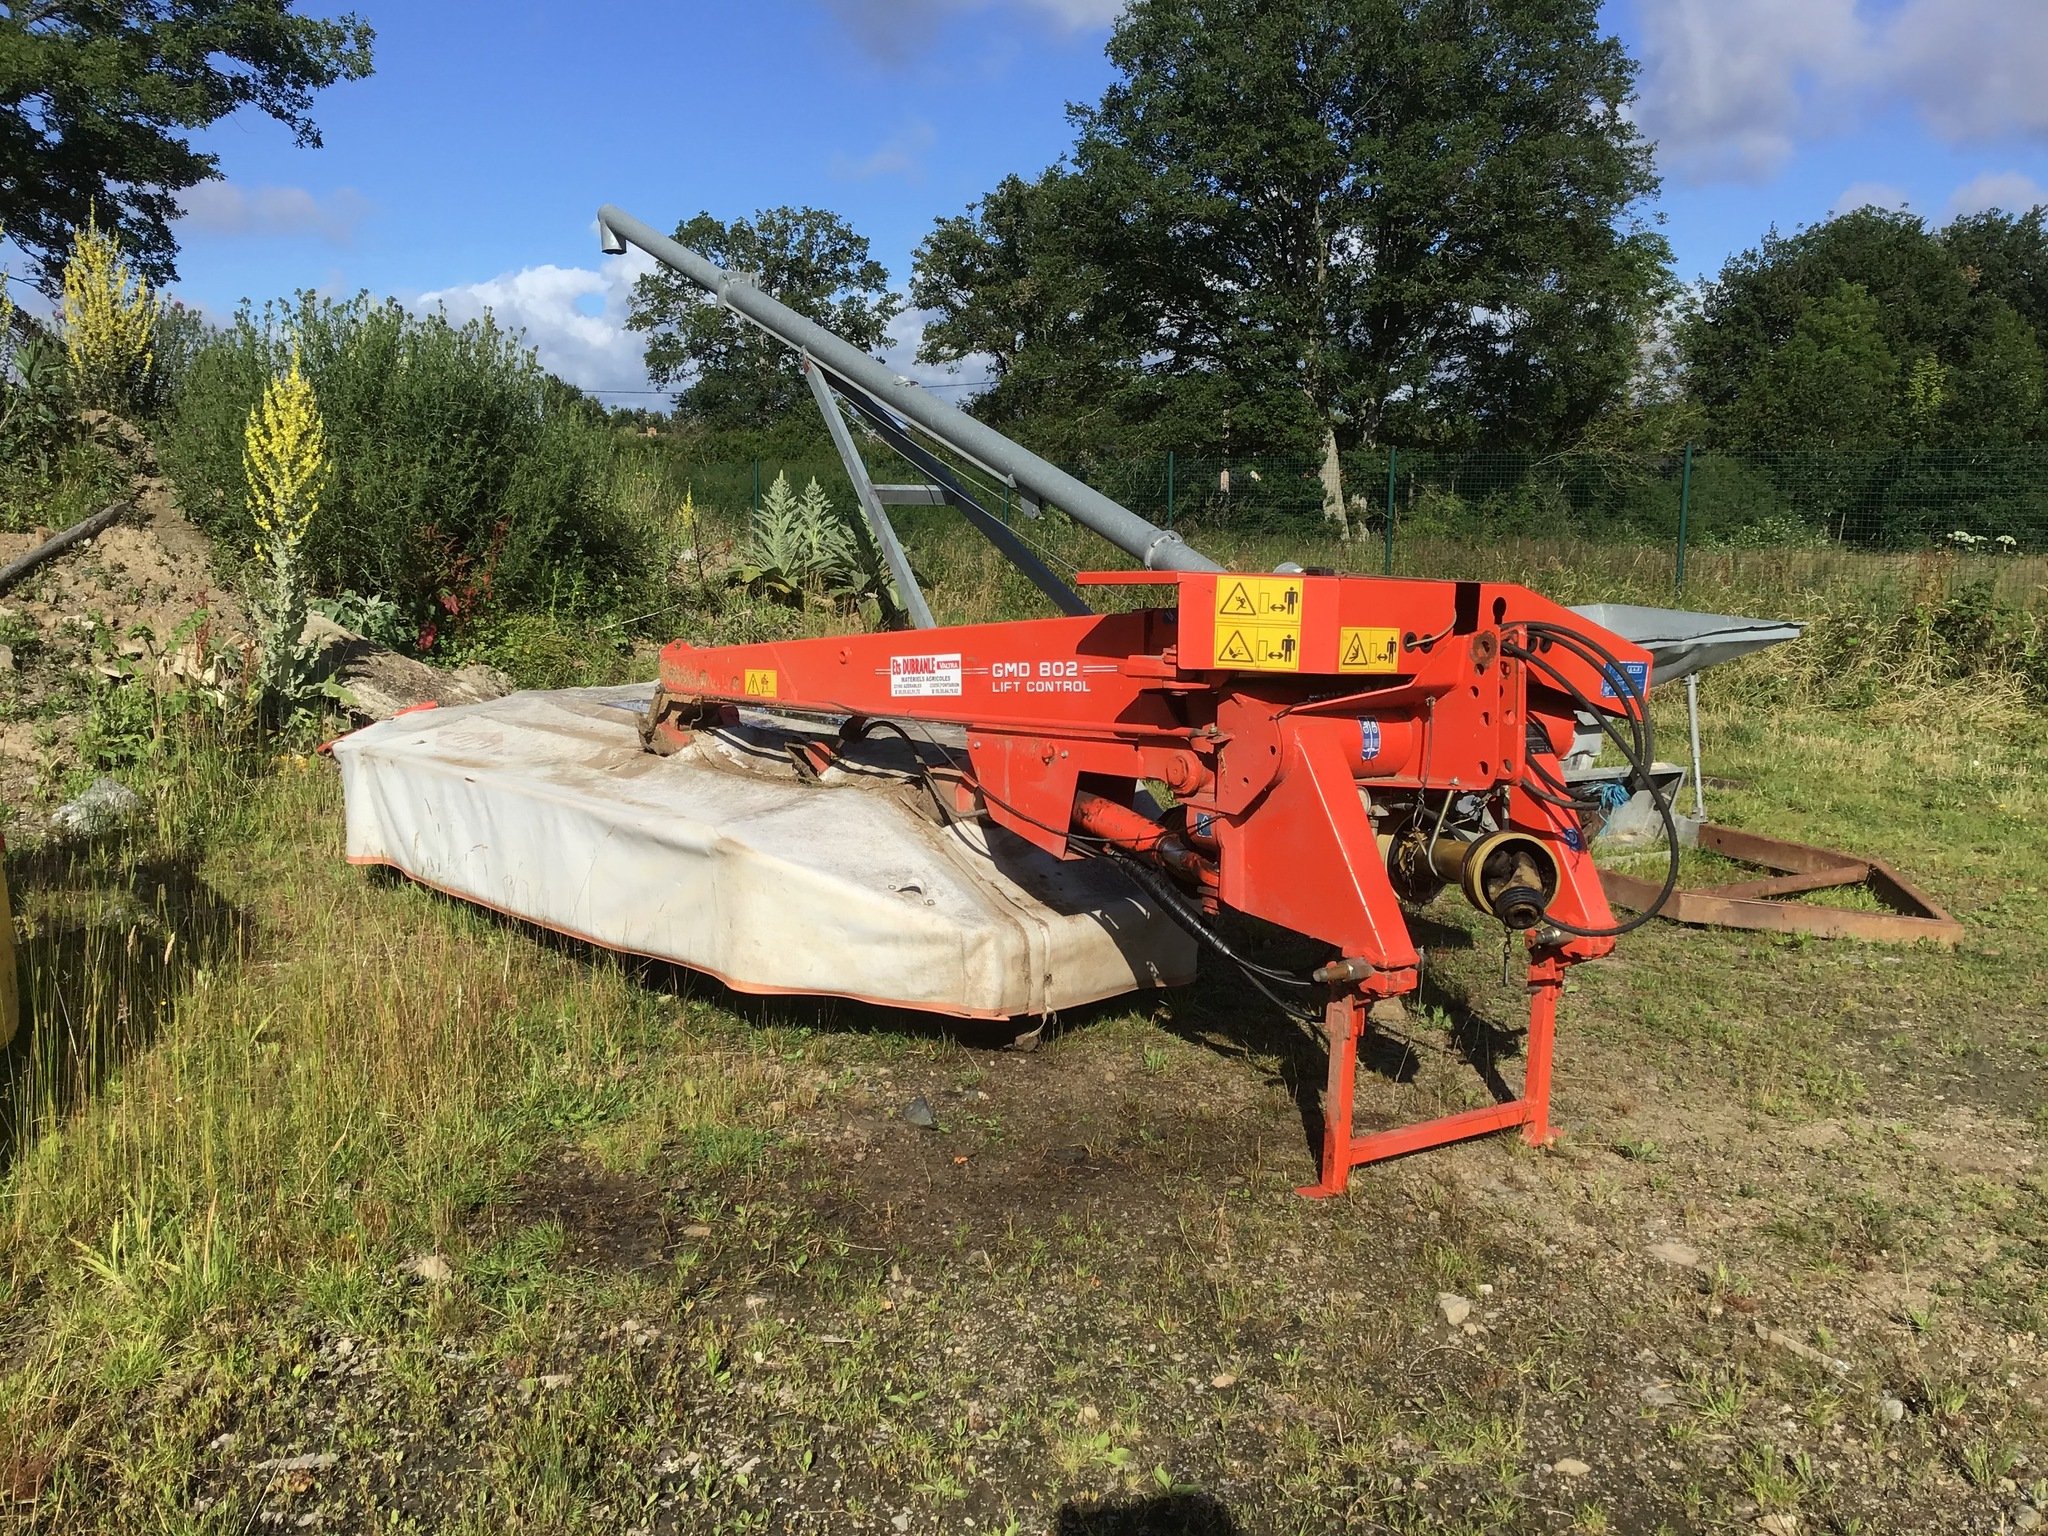 Faucheuse Kuhn GMD802LIFTCONTR - 1